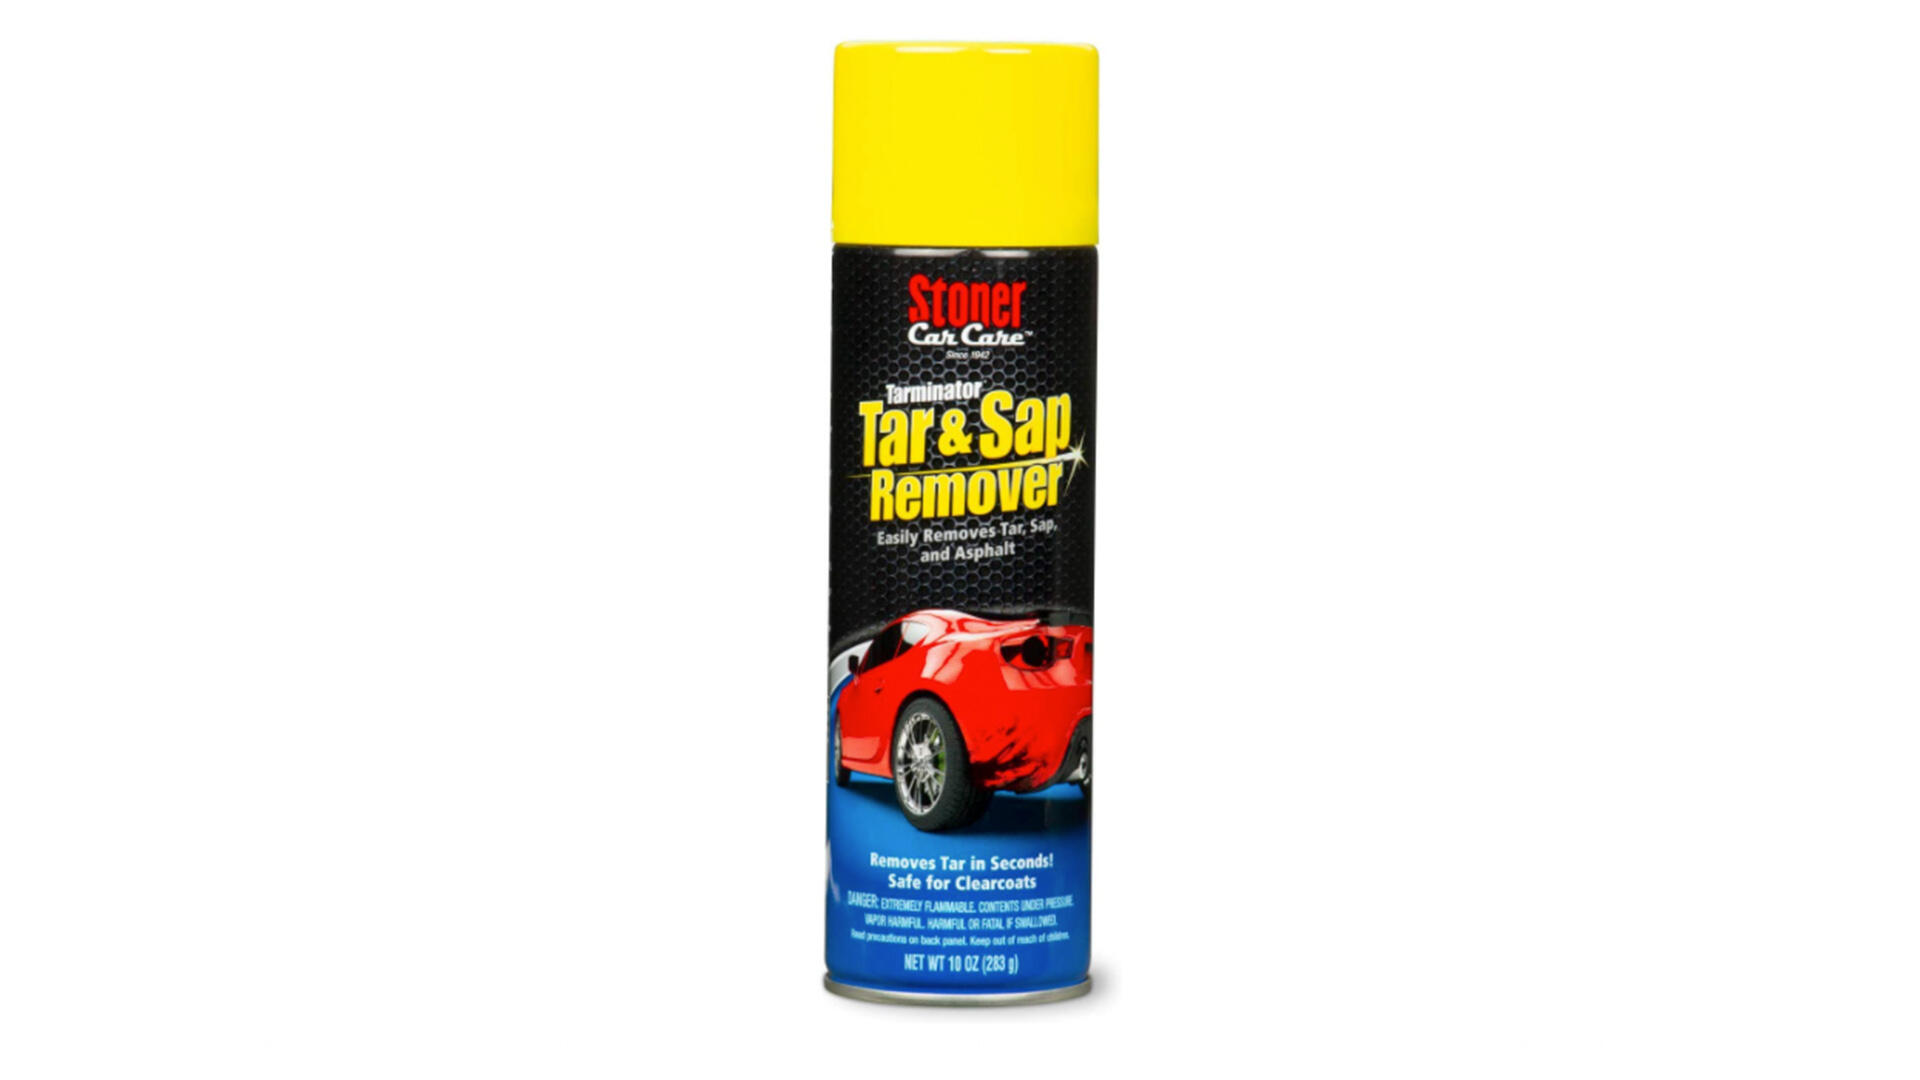 Whats your favorite Bug and Tar removal products